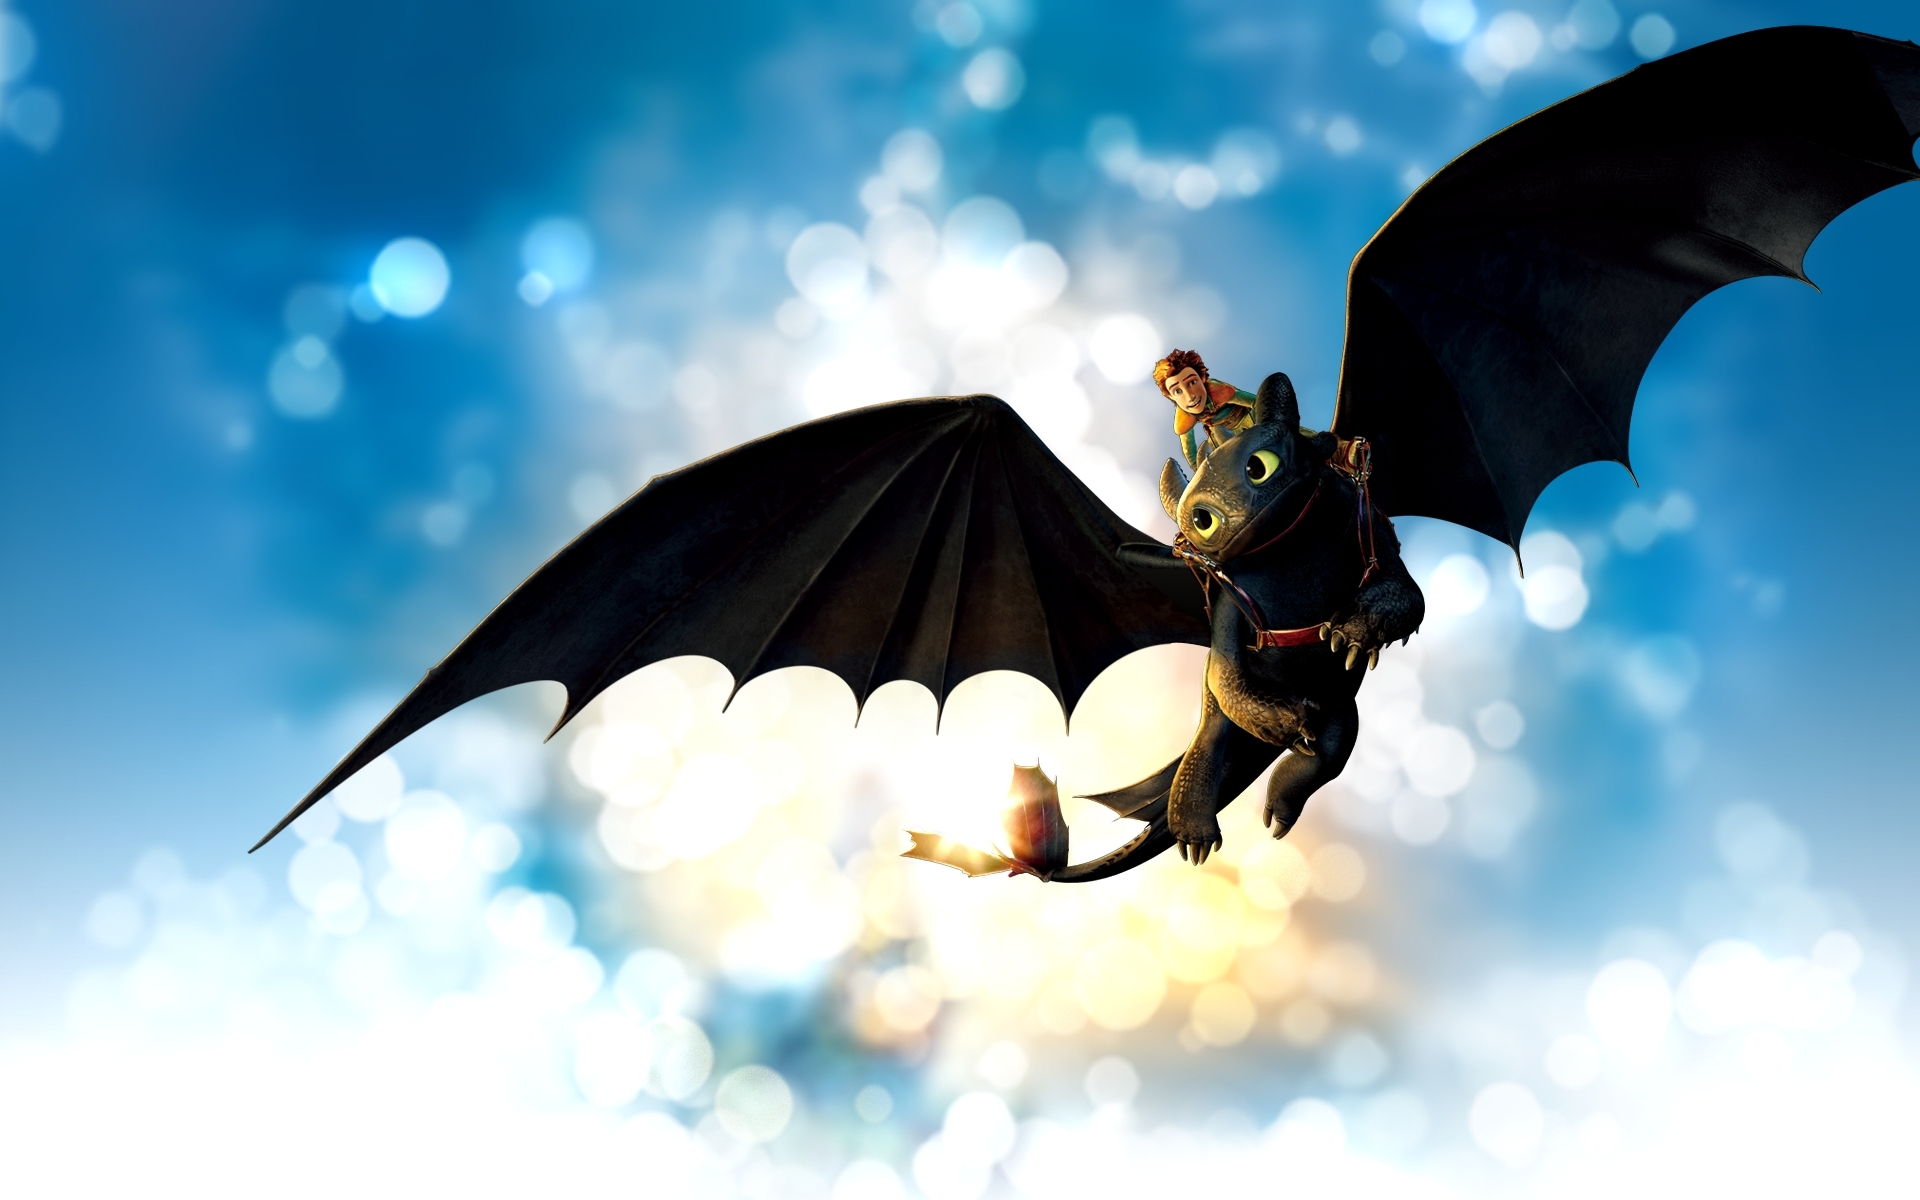 Toothless - How to Train Your Dragon Fan Art (13804265 ...